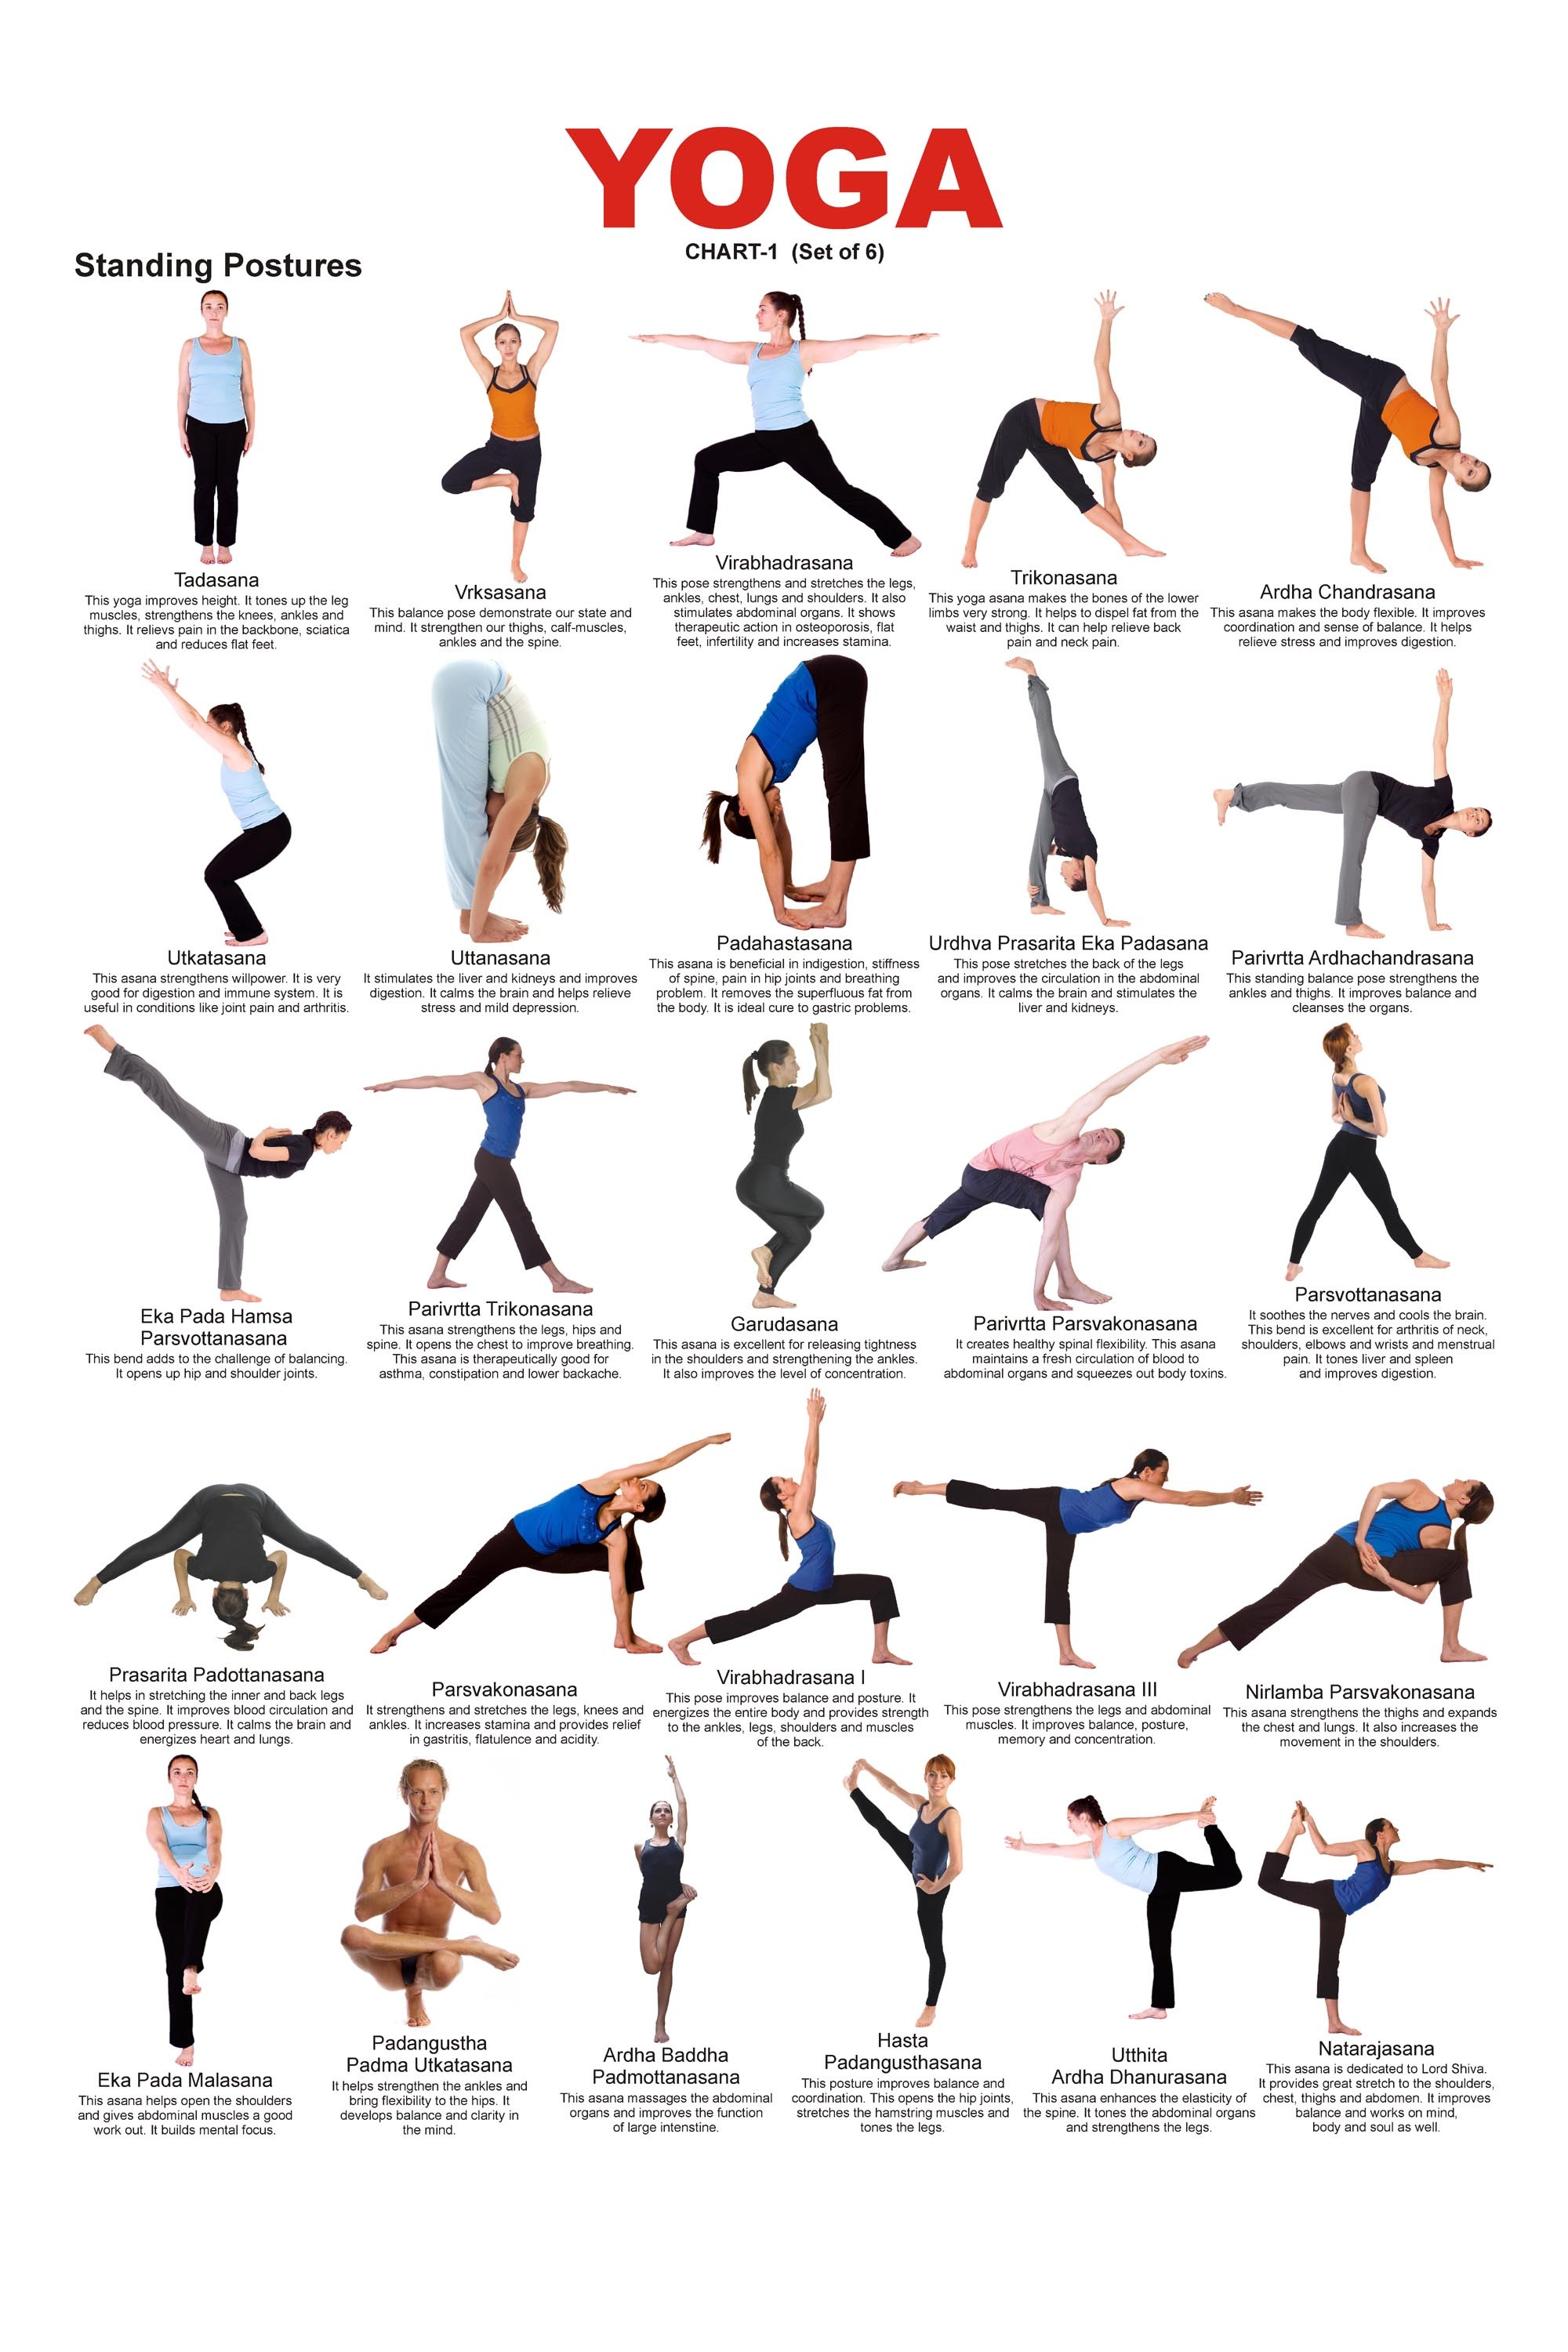 Types of Yoga Asanas with Pictures - Different Yoga Asanas Programmes